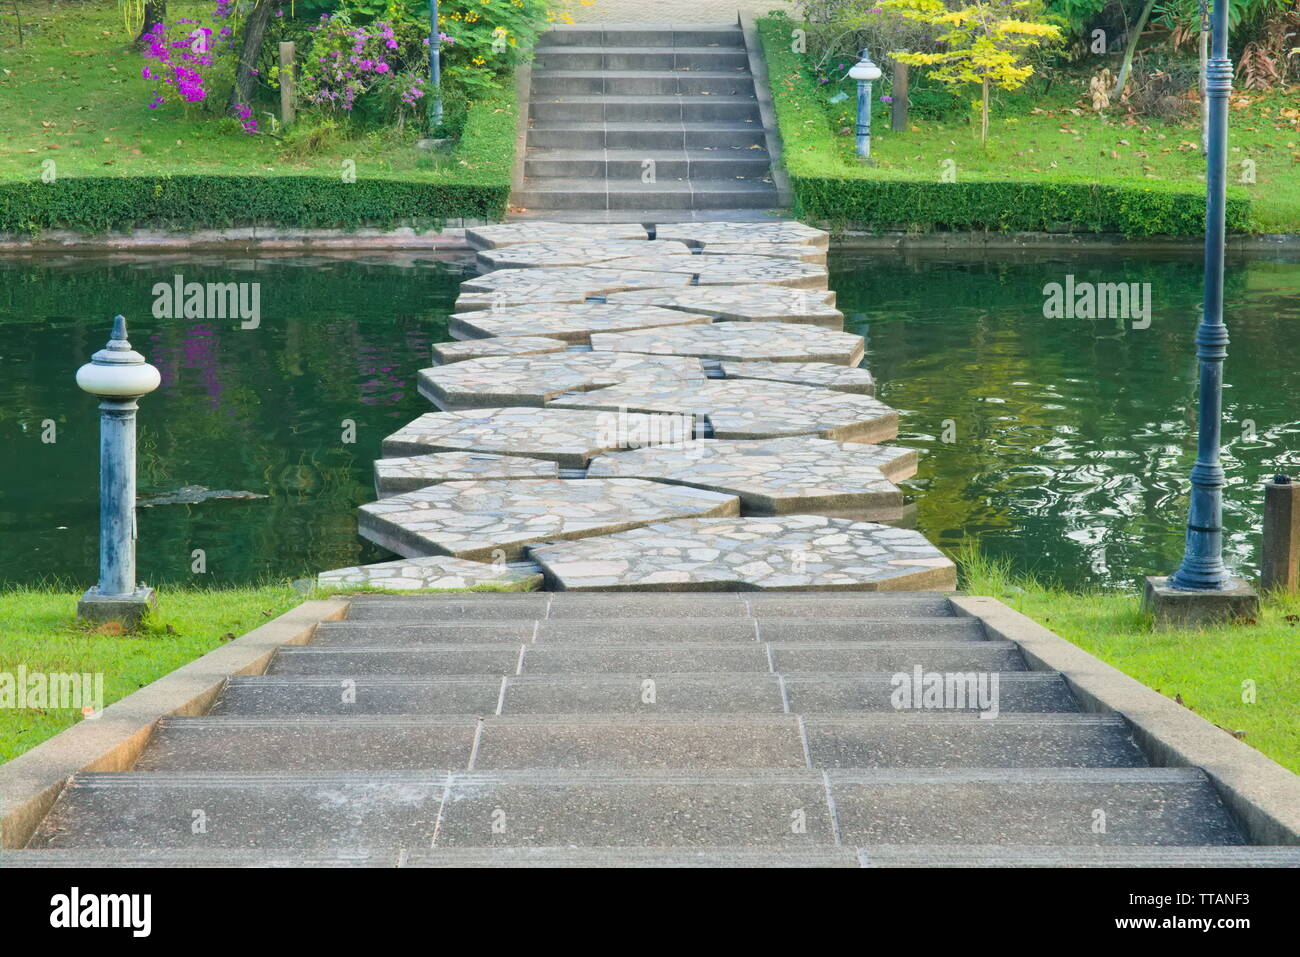 A landscape view of cement steps, leading down towards a green canal stone bridge with watery gaps, and beyond into a lovely, flowery garden park. Stock Photo